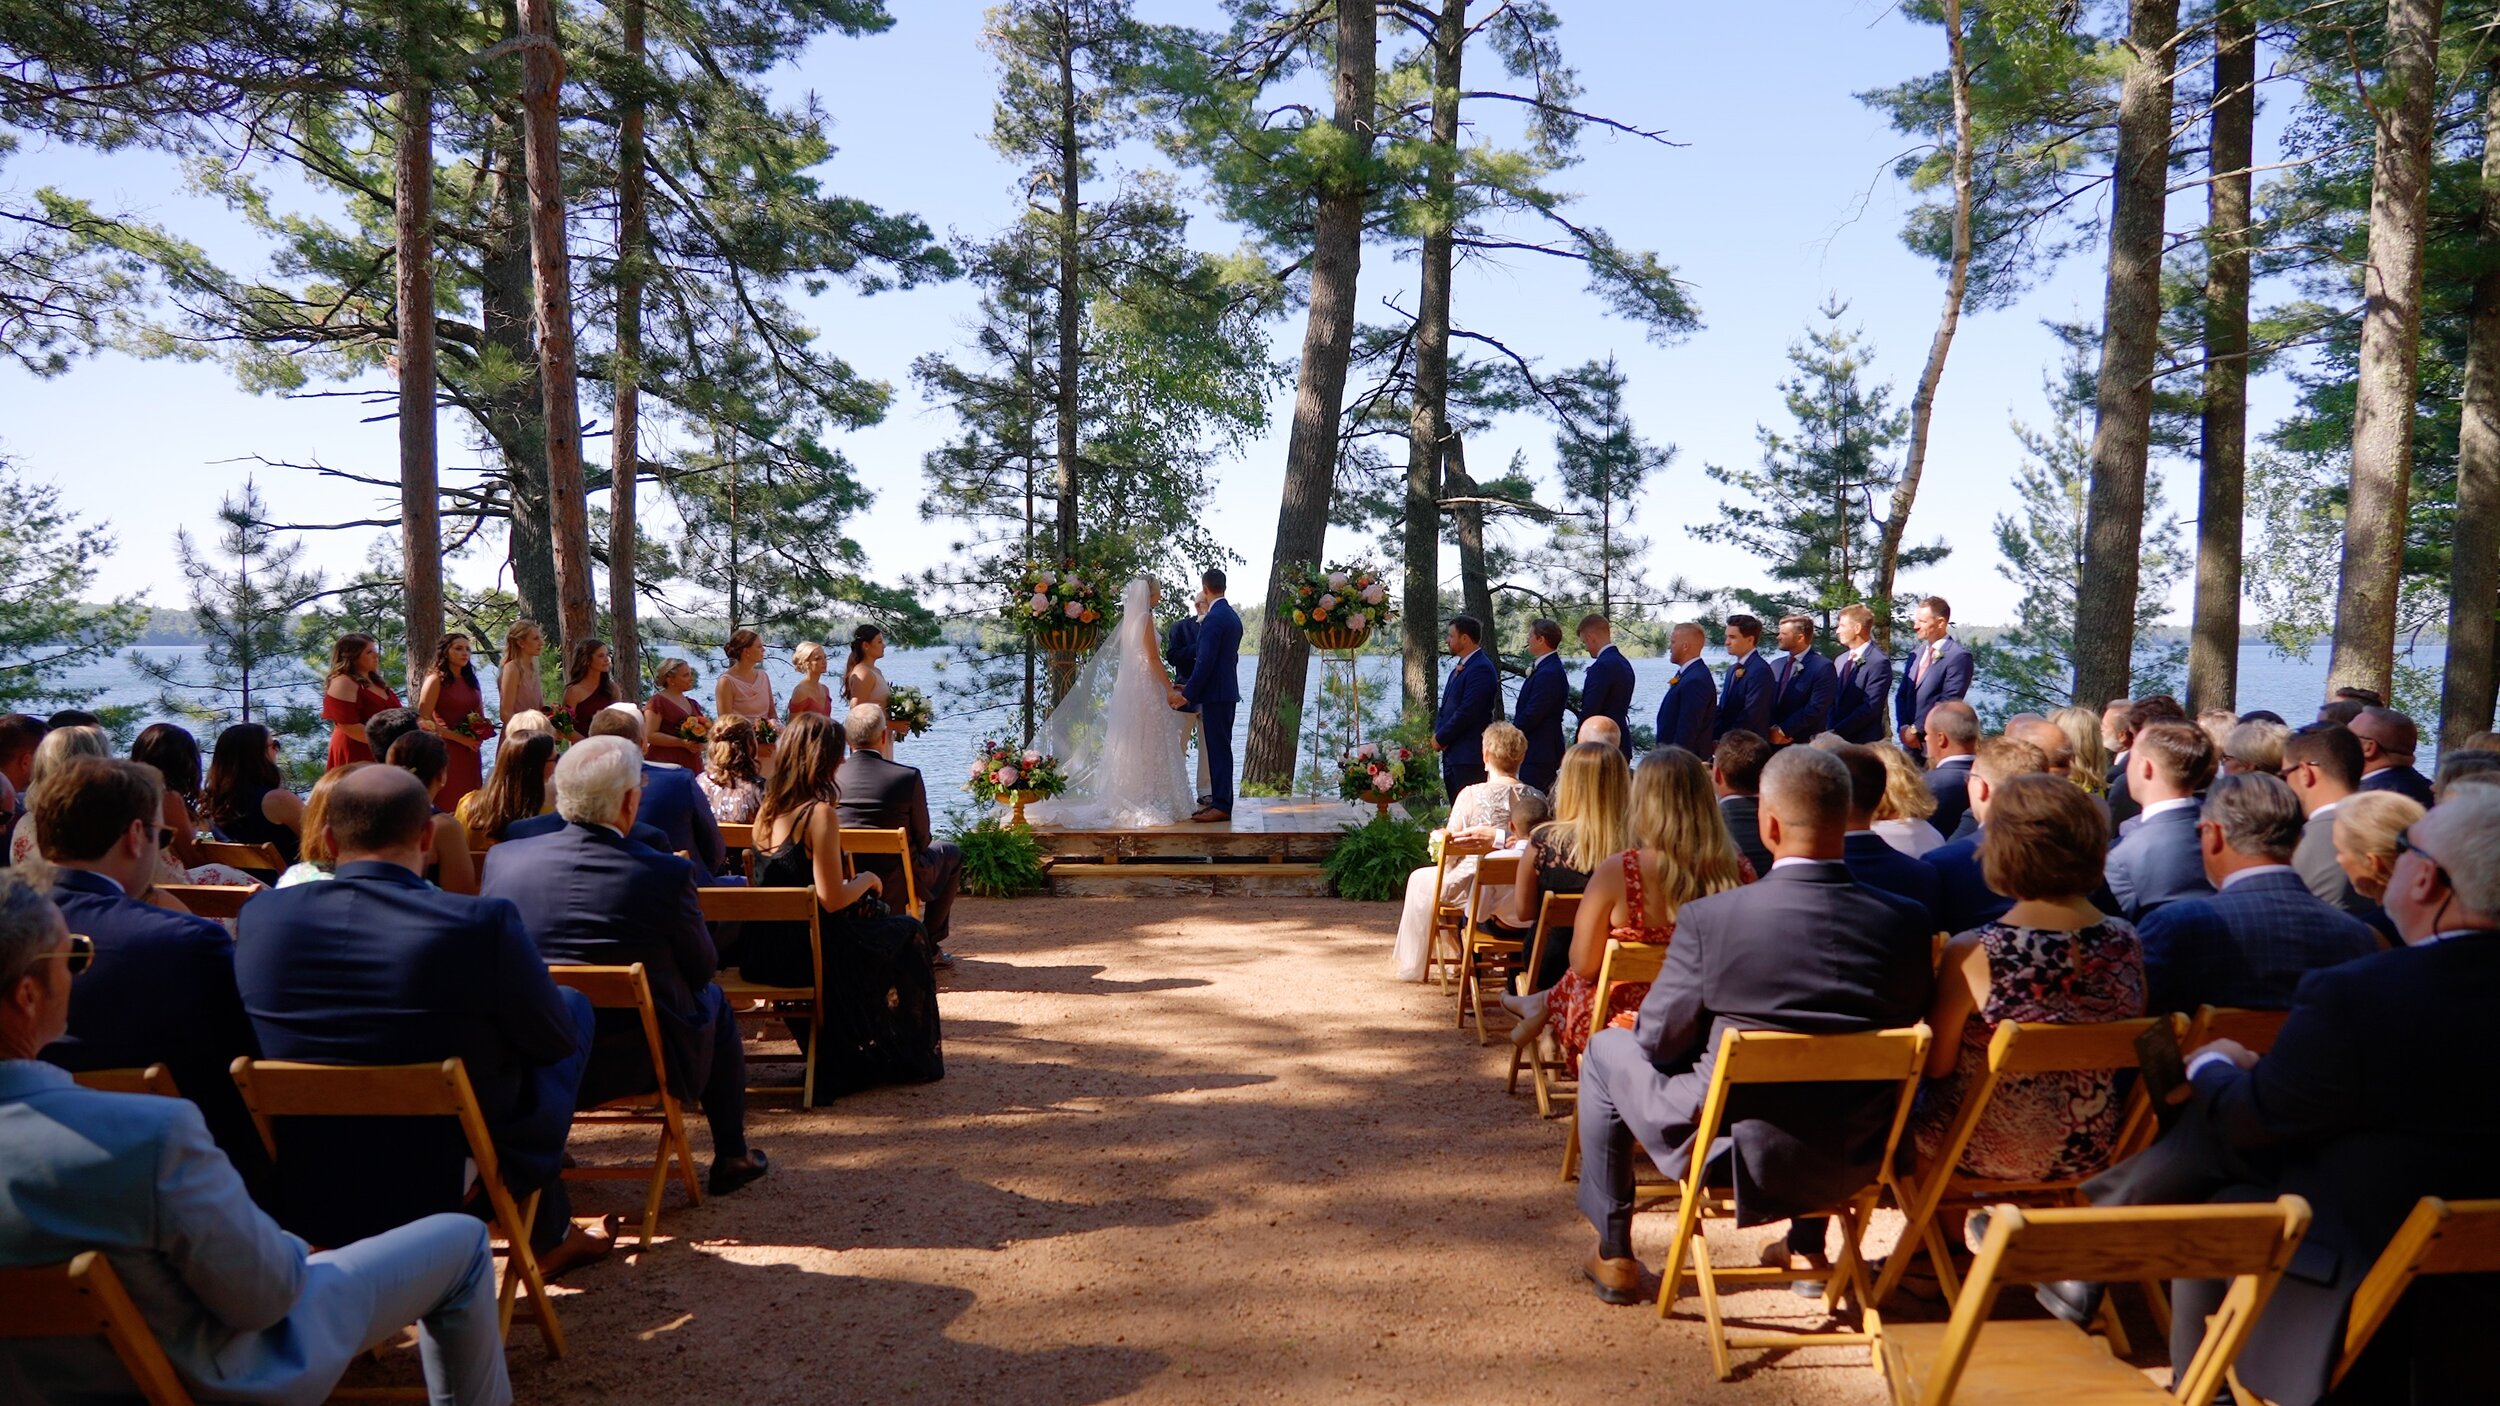 Lakeside Ceremony at coon's franklin lodge